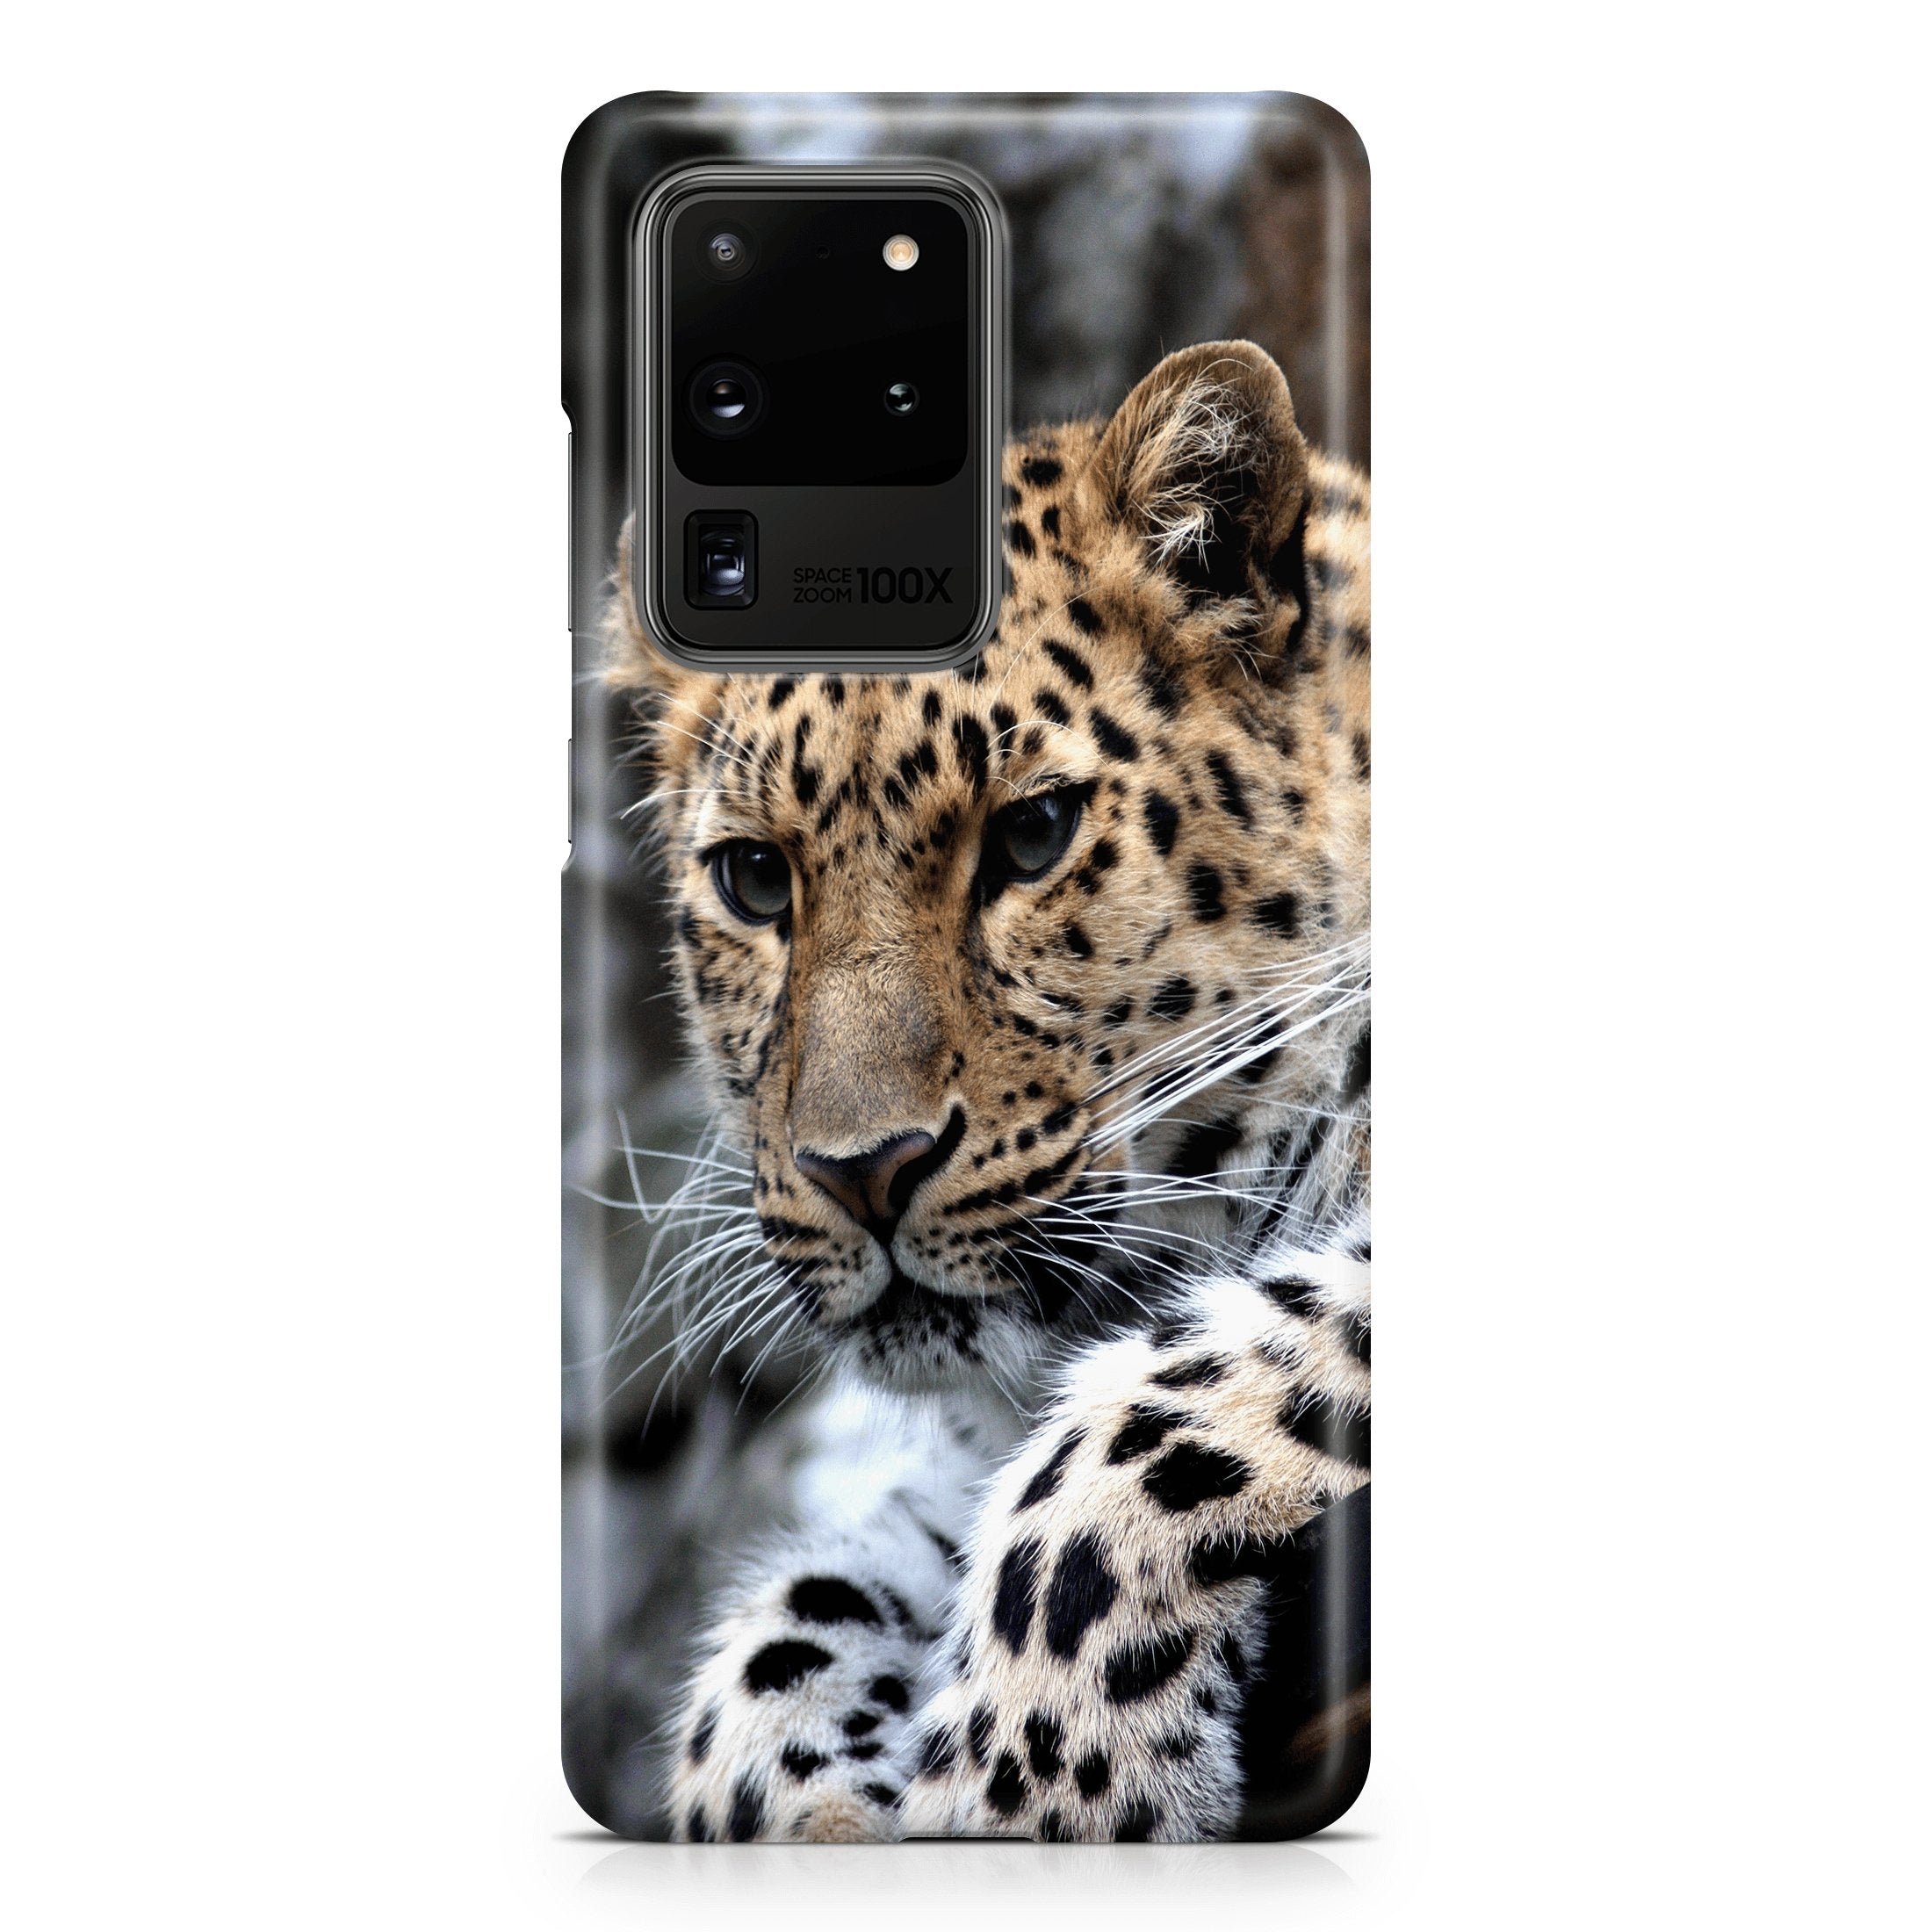 Leopard I - Samsung phone case designs by CaseSwagger